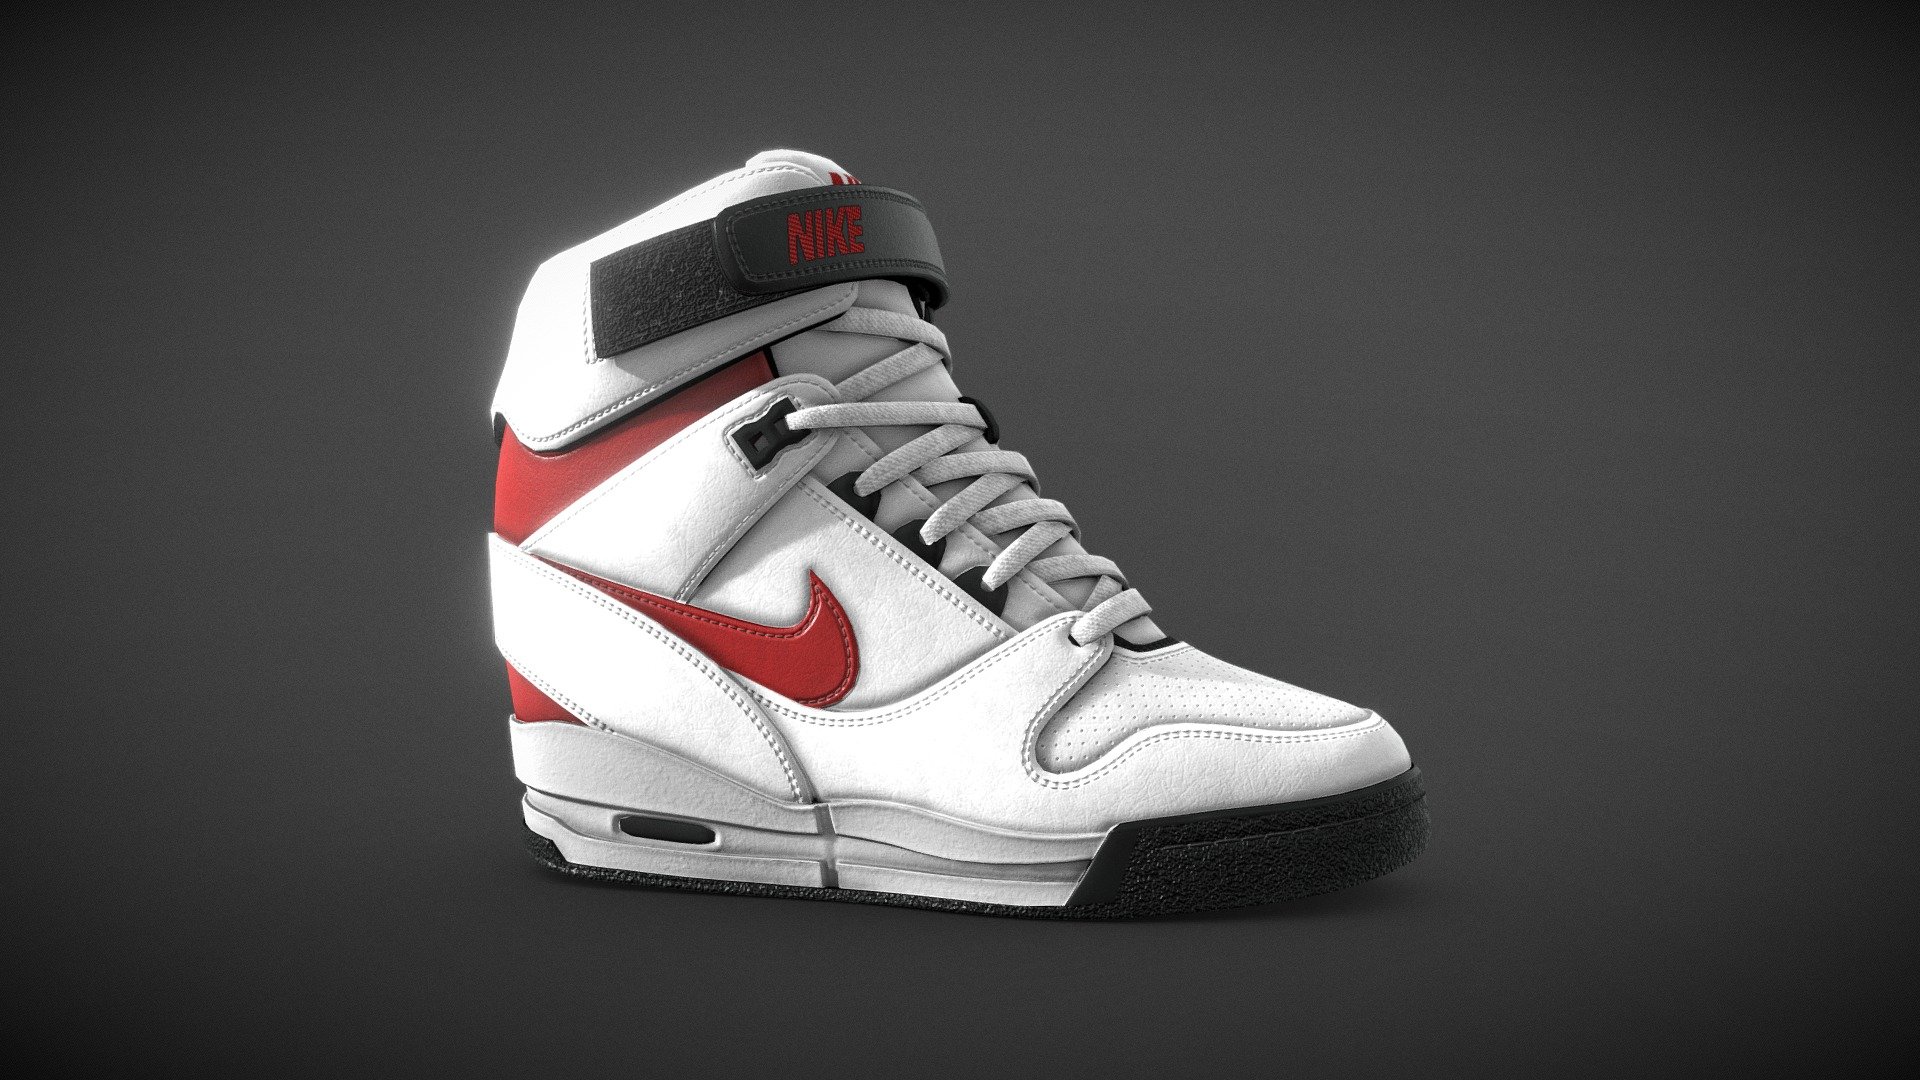 Nike Revolution Sky High - Wedge Women’s sneakers

Game and production ready, polycount optimized for quality, ideal for high quality Characters and Close-Ups
Internal parts modeled and textured, ideal for customization or animation
Laces are continuous, no cuts behind the eyelets

Single UV space
PBR and UE4 4k Textures
Low Poly has 5.7k quads
FBX, OBJ, ZTL

Includes 4 color variants:
White/Red/Black
Black-Pink-White
Black-White
White-Grey - Nike Revolution Sky High - Buy Royalty Free 3D model by Feds452 3d model